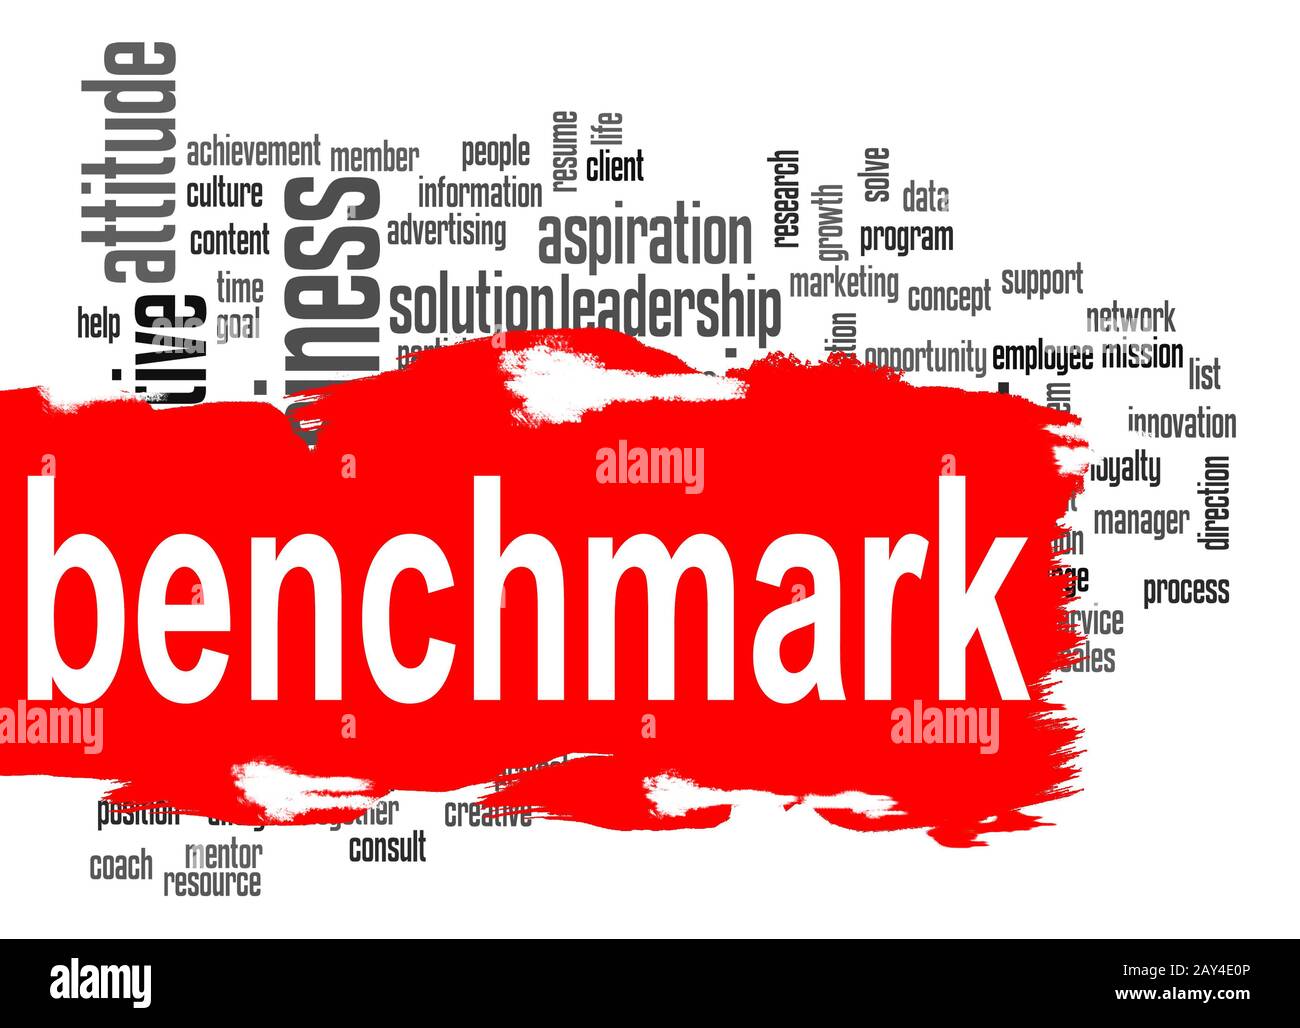 Benchmark word cloud with red banner Stock Photo